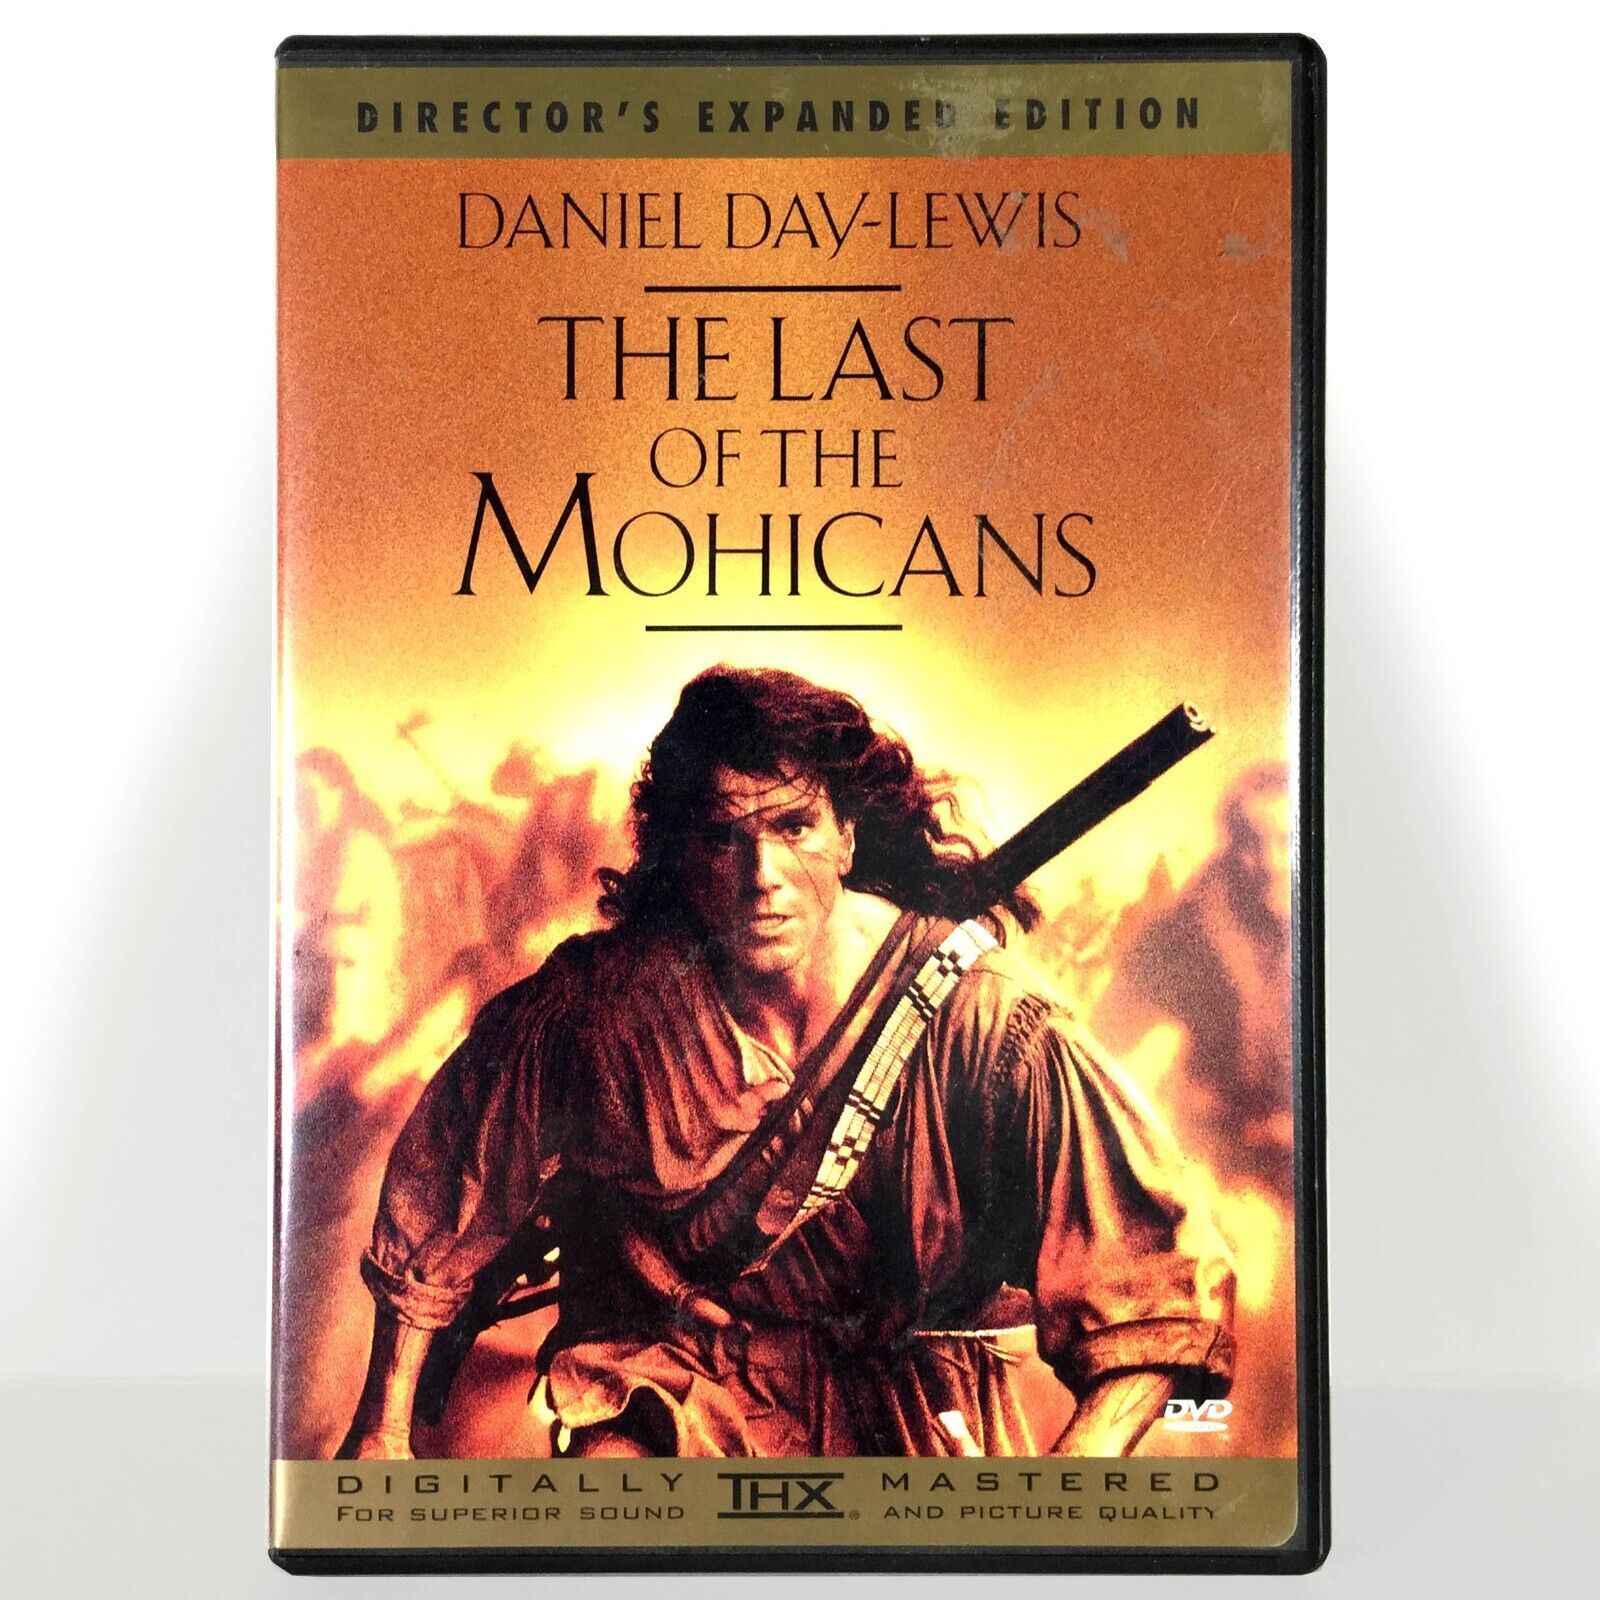 Primary image for The Last of the Mohicans (DVD, 1992, Director's Expanded Ed) Daniel Day-Lewis